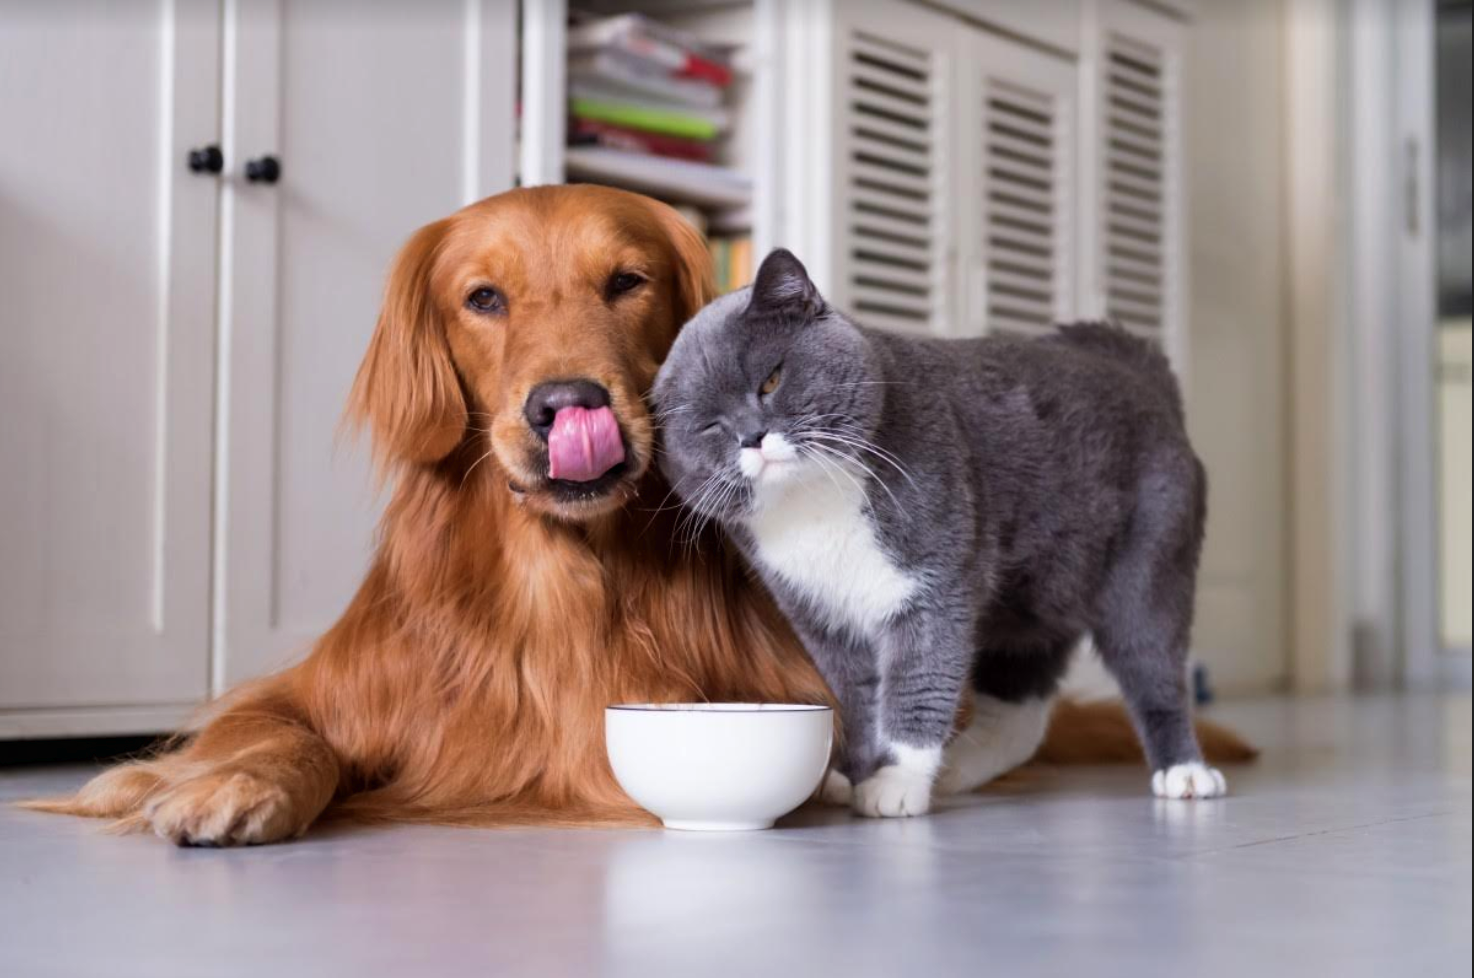 Is cat food dangerous for my dog?